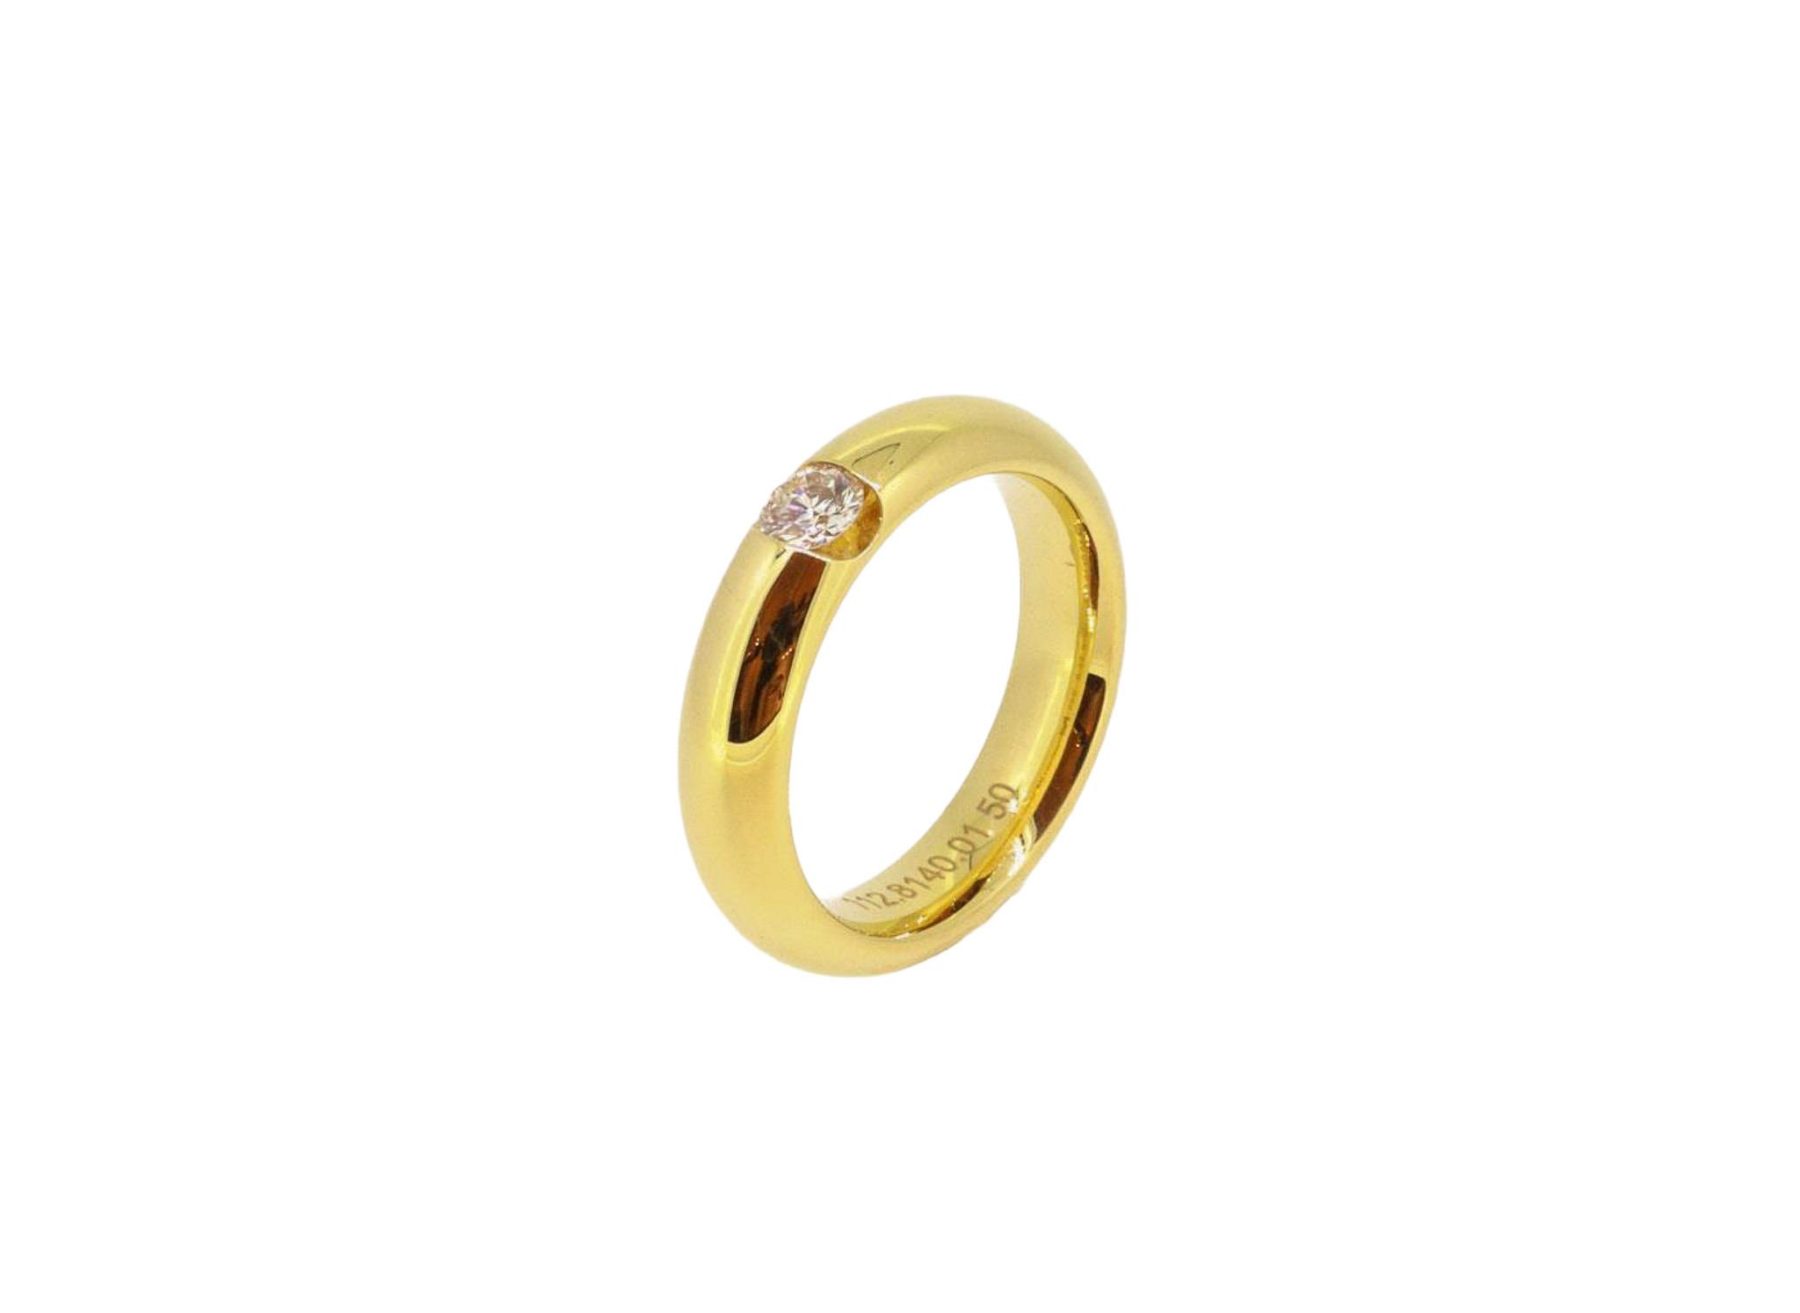 Ring 0,22ct Solitaire 18ct Gelbgold - Meister - 112.8140.01